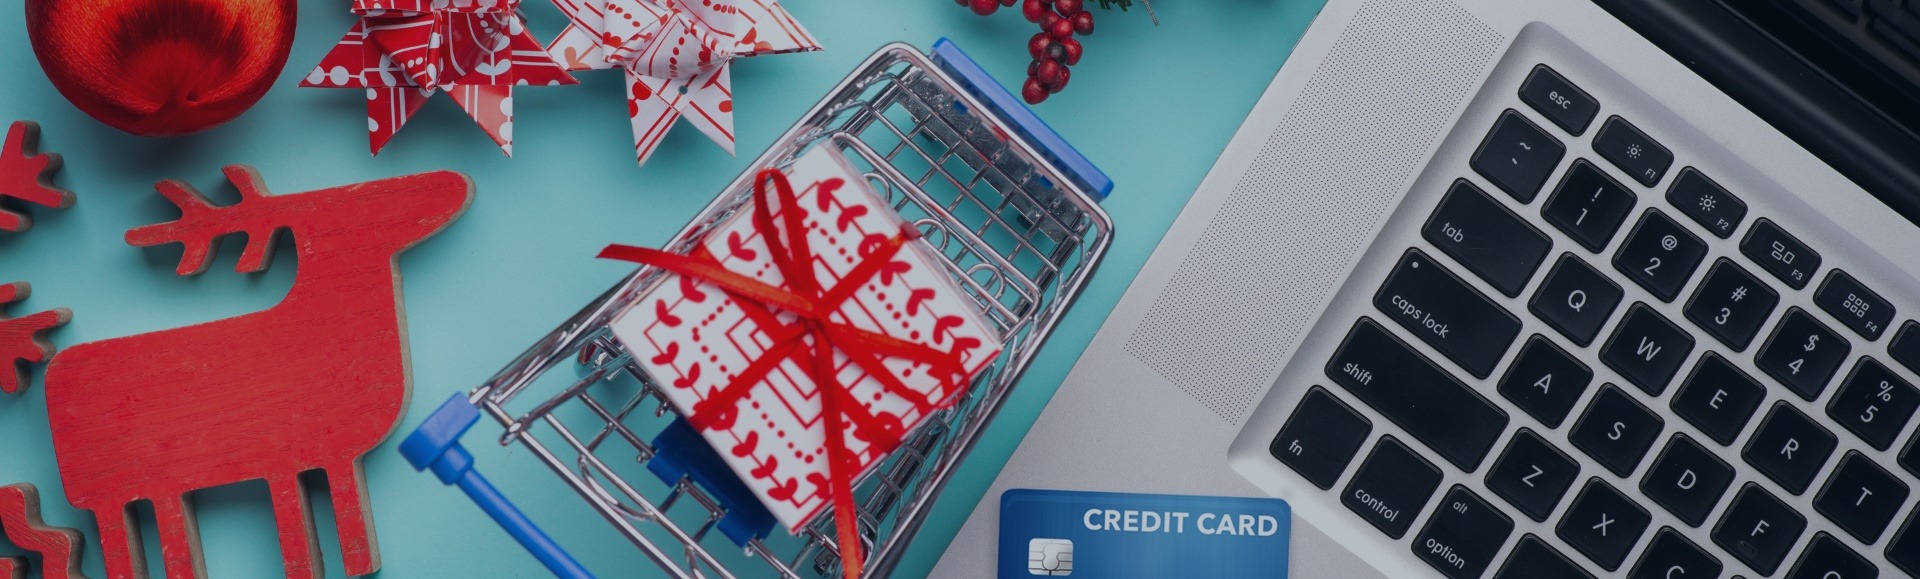 Shopping During the Festive Period. An Upsurge in Cyber Threats